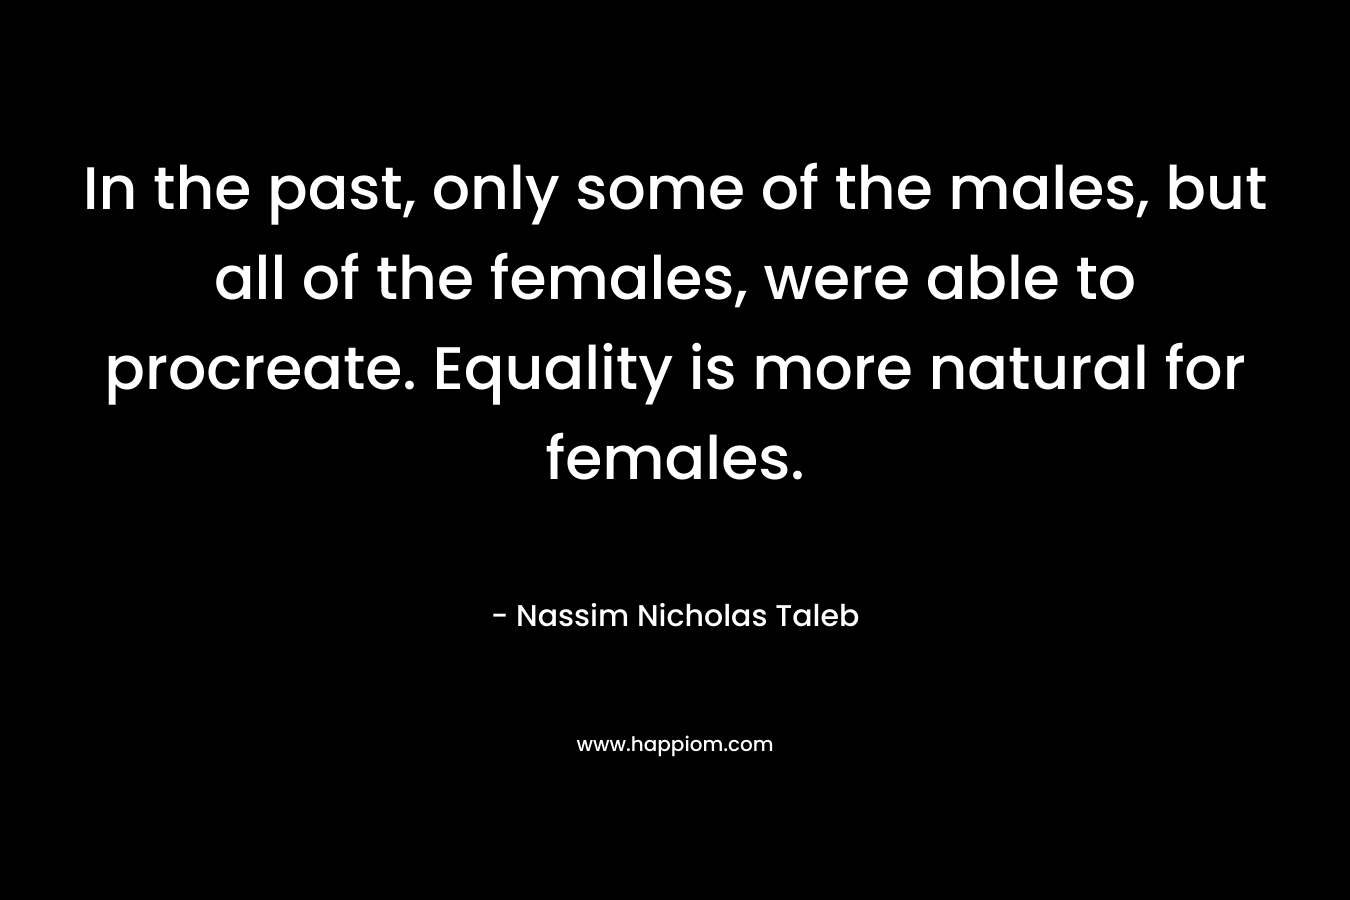 In the past, only some of the males, but all of the females, were able to procreate. Equality is more natural for females. – Nassim Nicholas Taleb